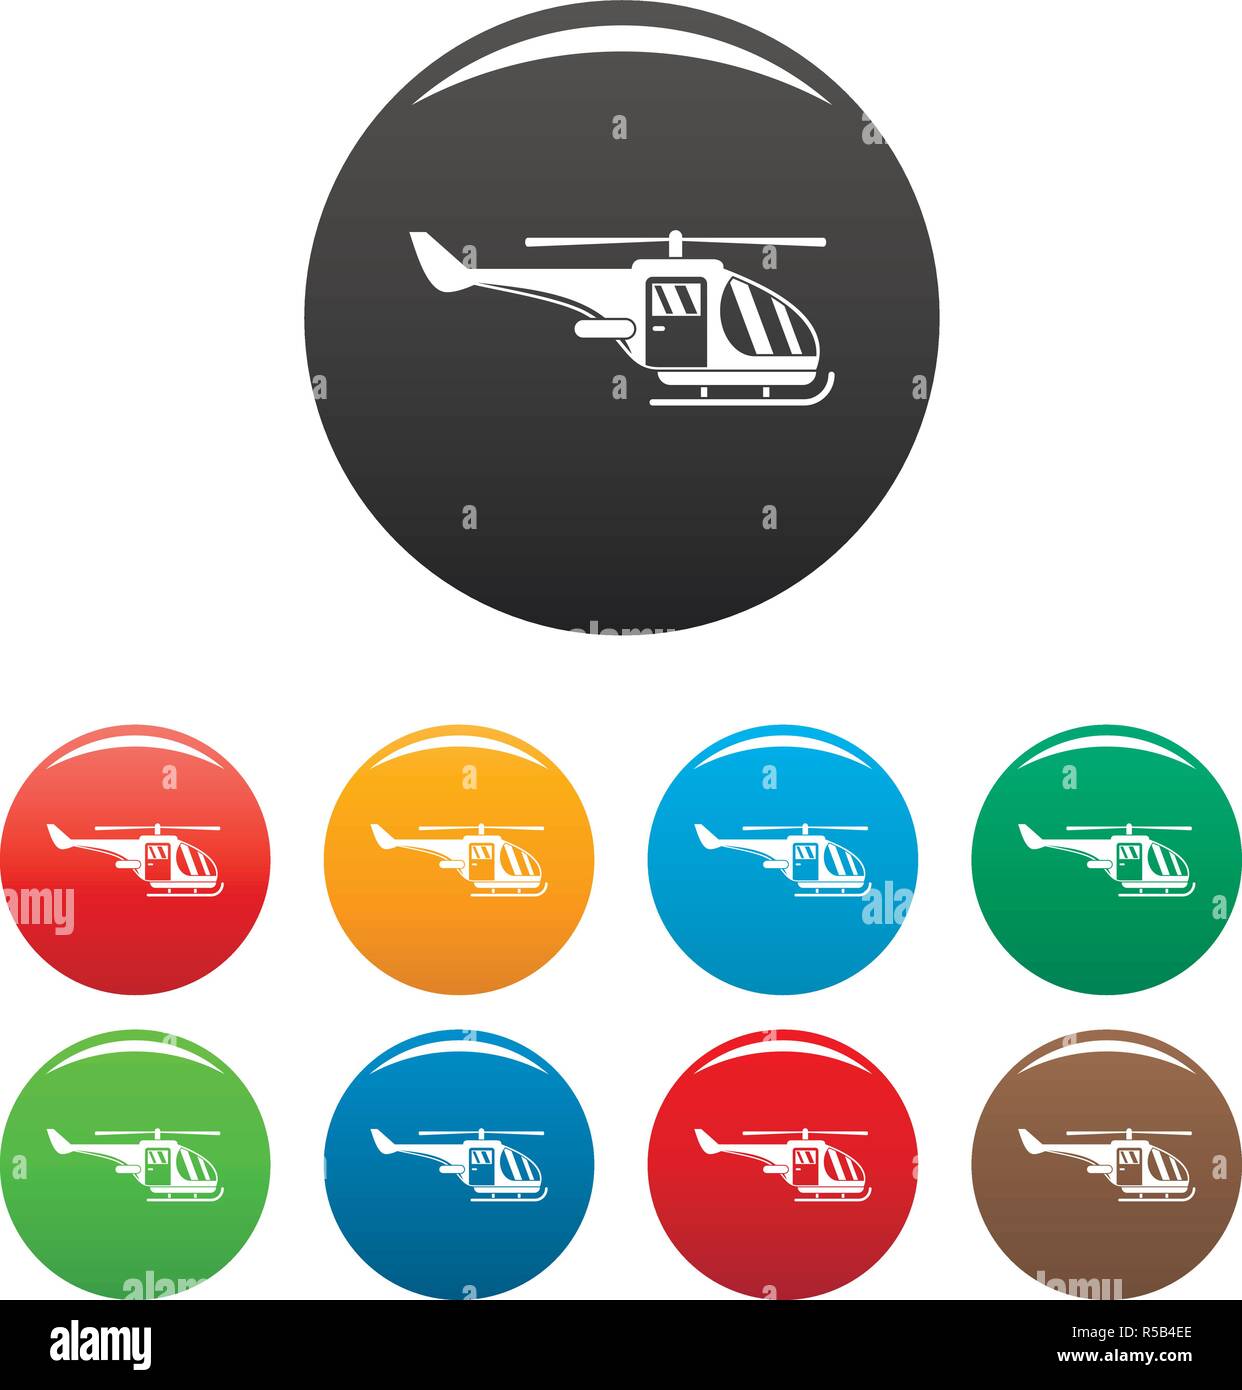 Military helicopter icons set 9 color vector isolated on white for any design Stock Vector